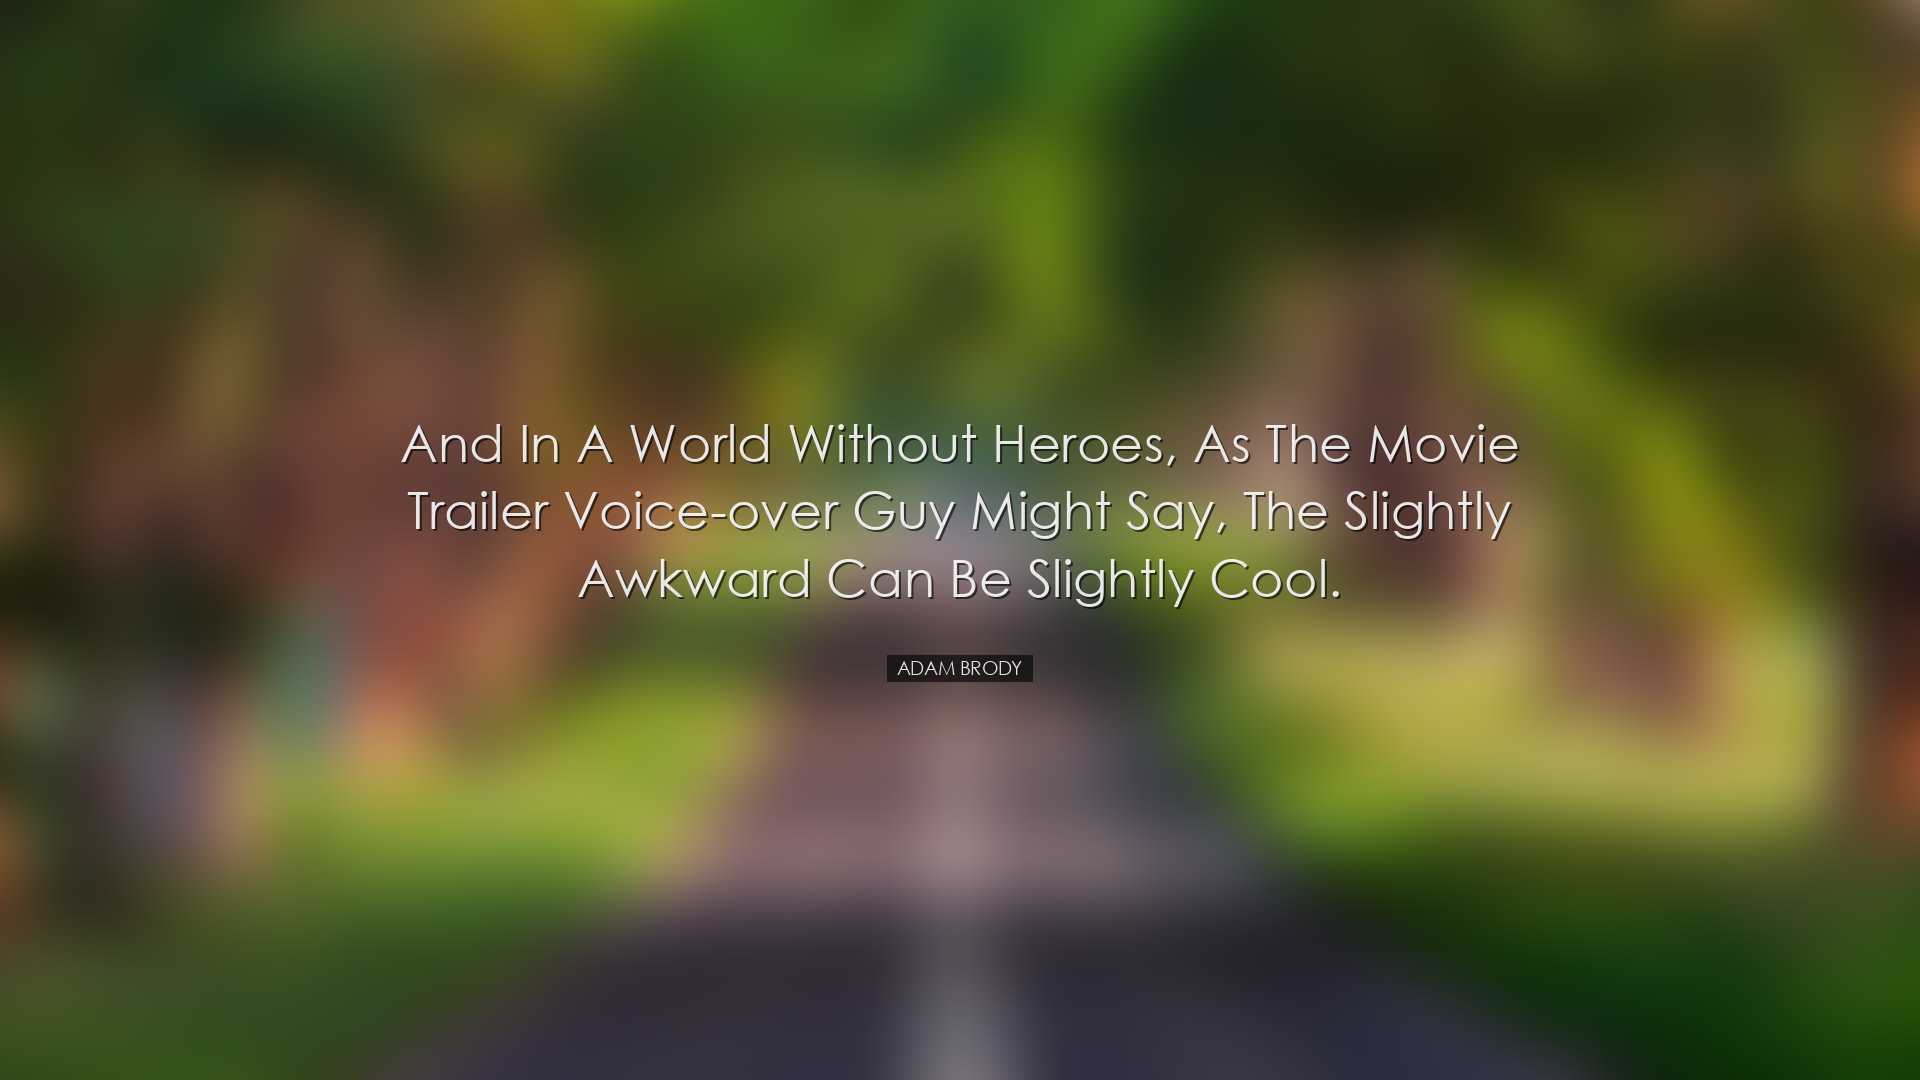 And in a world without heroes, as the movie trailer voice-over guy